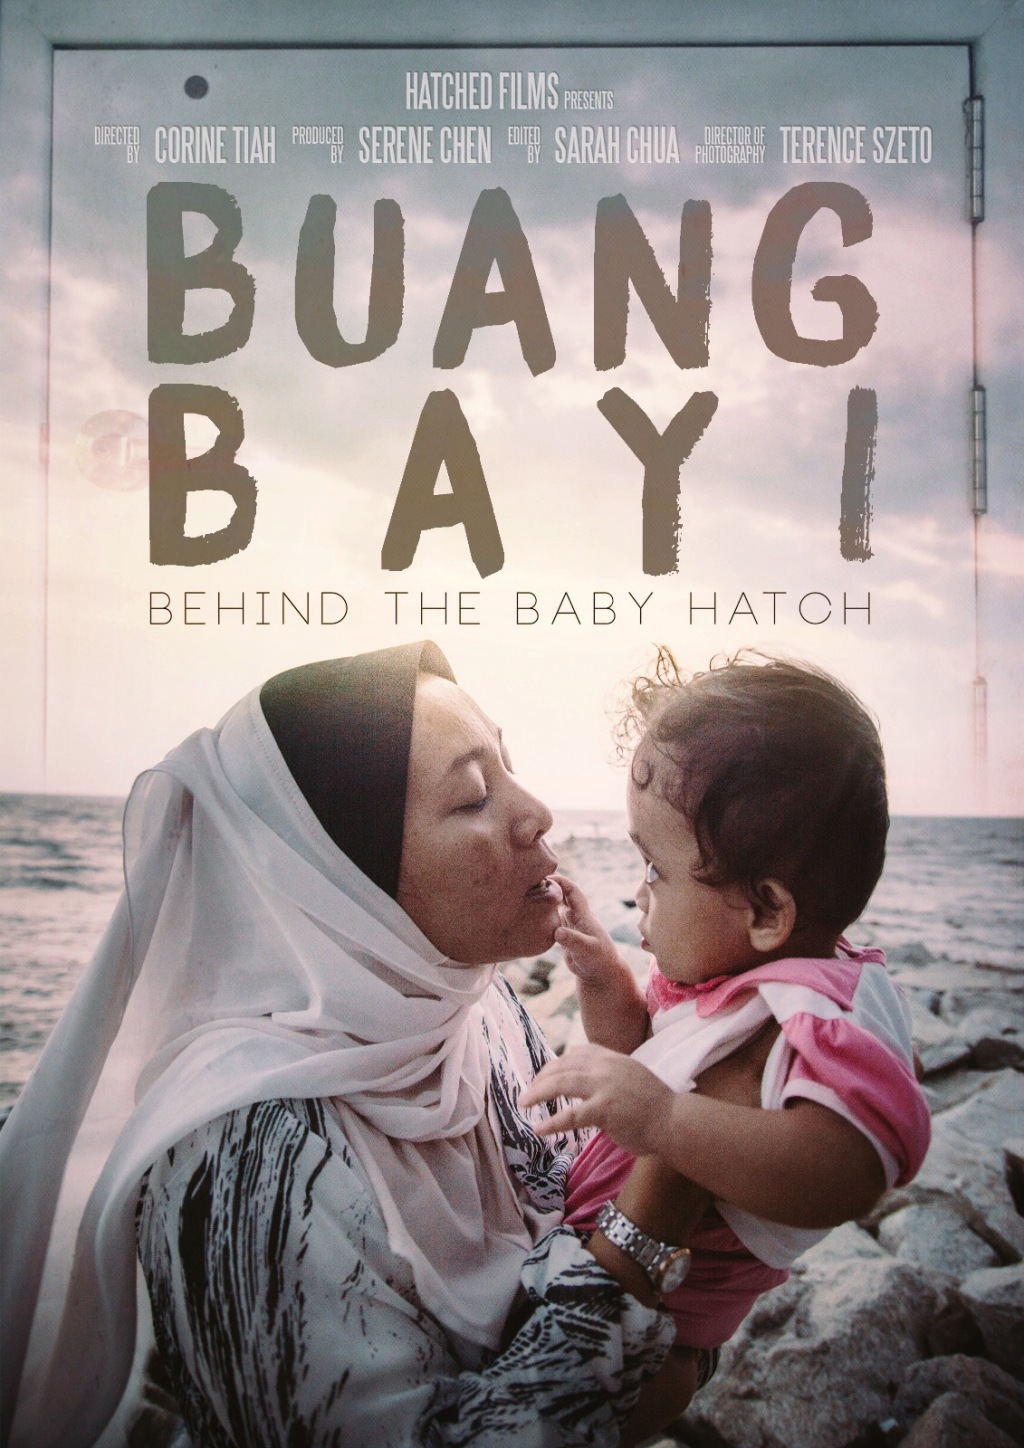 BUANG BAYI – Behind the Baby Hatch